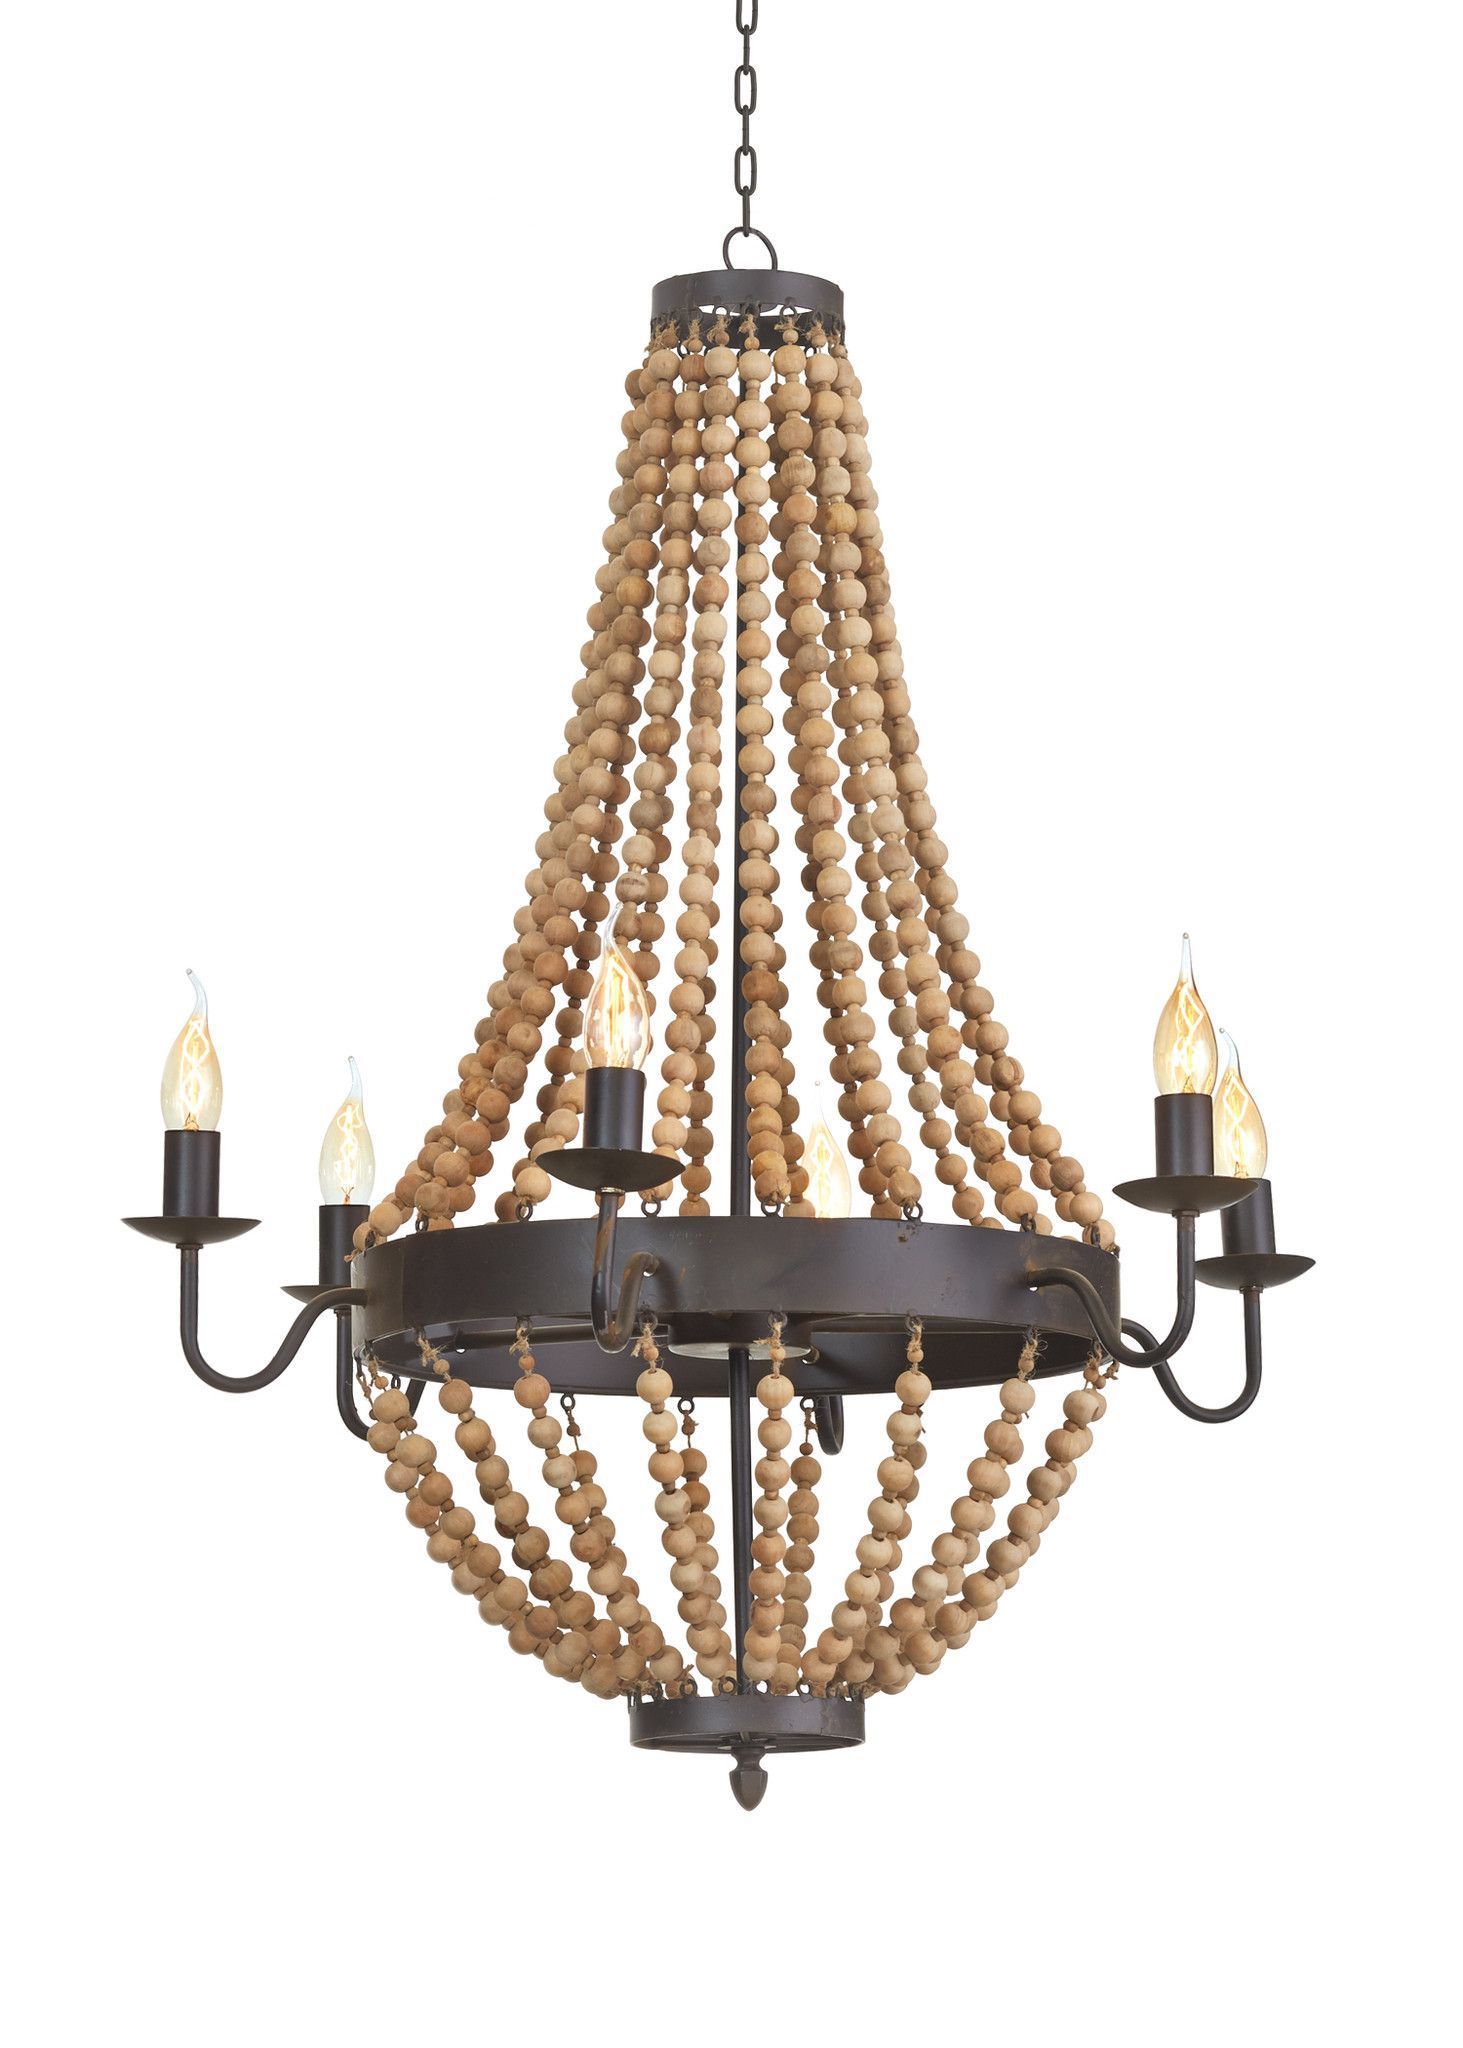 Vintage Wood Bead Chandelier | Home Styling | Wood Bead In Duron 5 Light Empire Chandeliers (View 28 of 30)